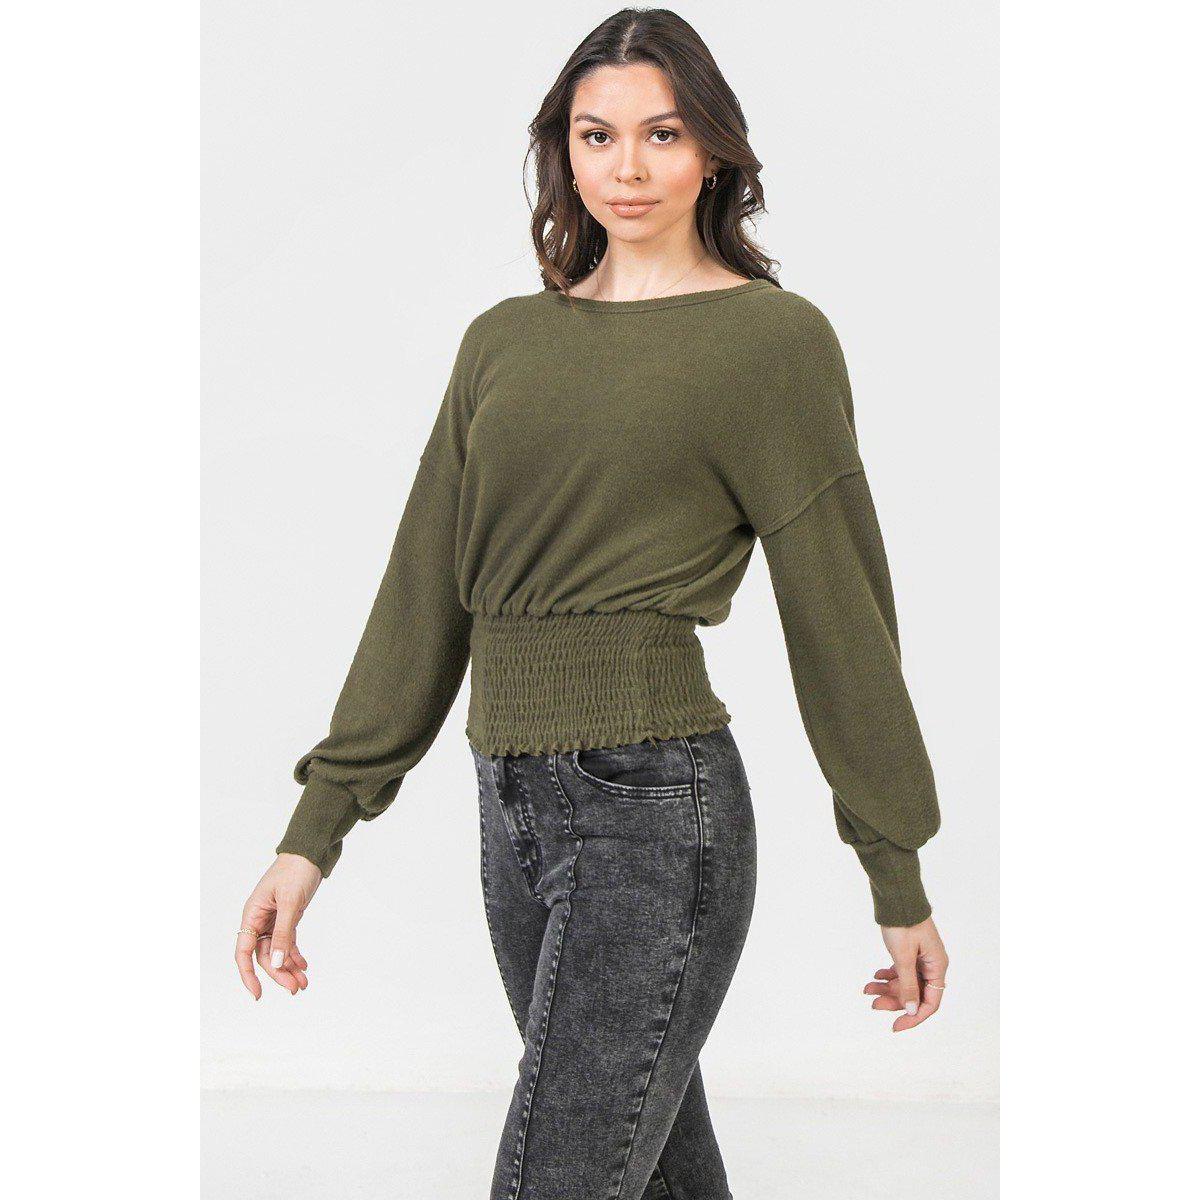 A Knit Top Featuring Wide Neckline-Clothing Shirts-NXTLVLNYC